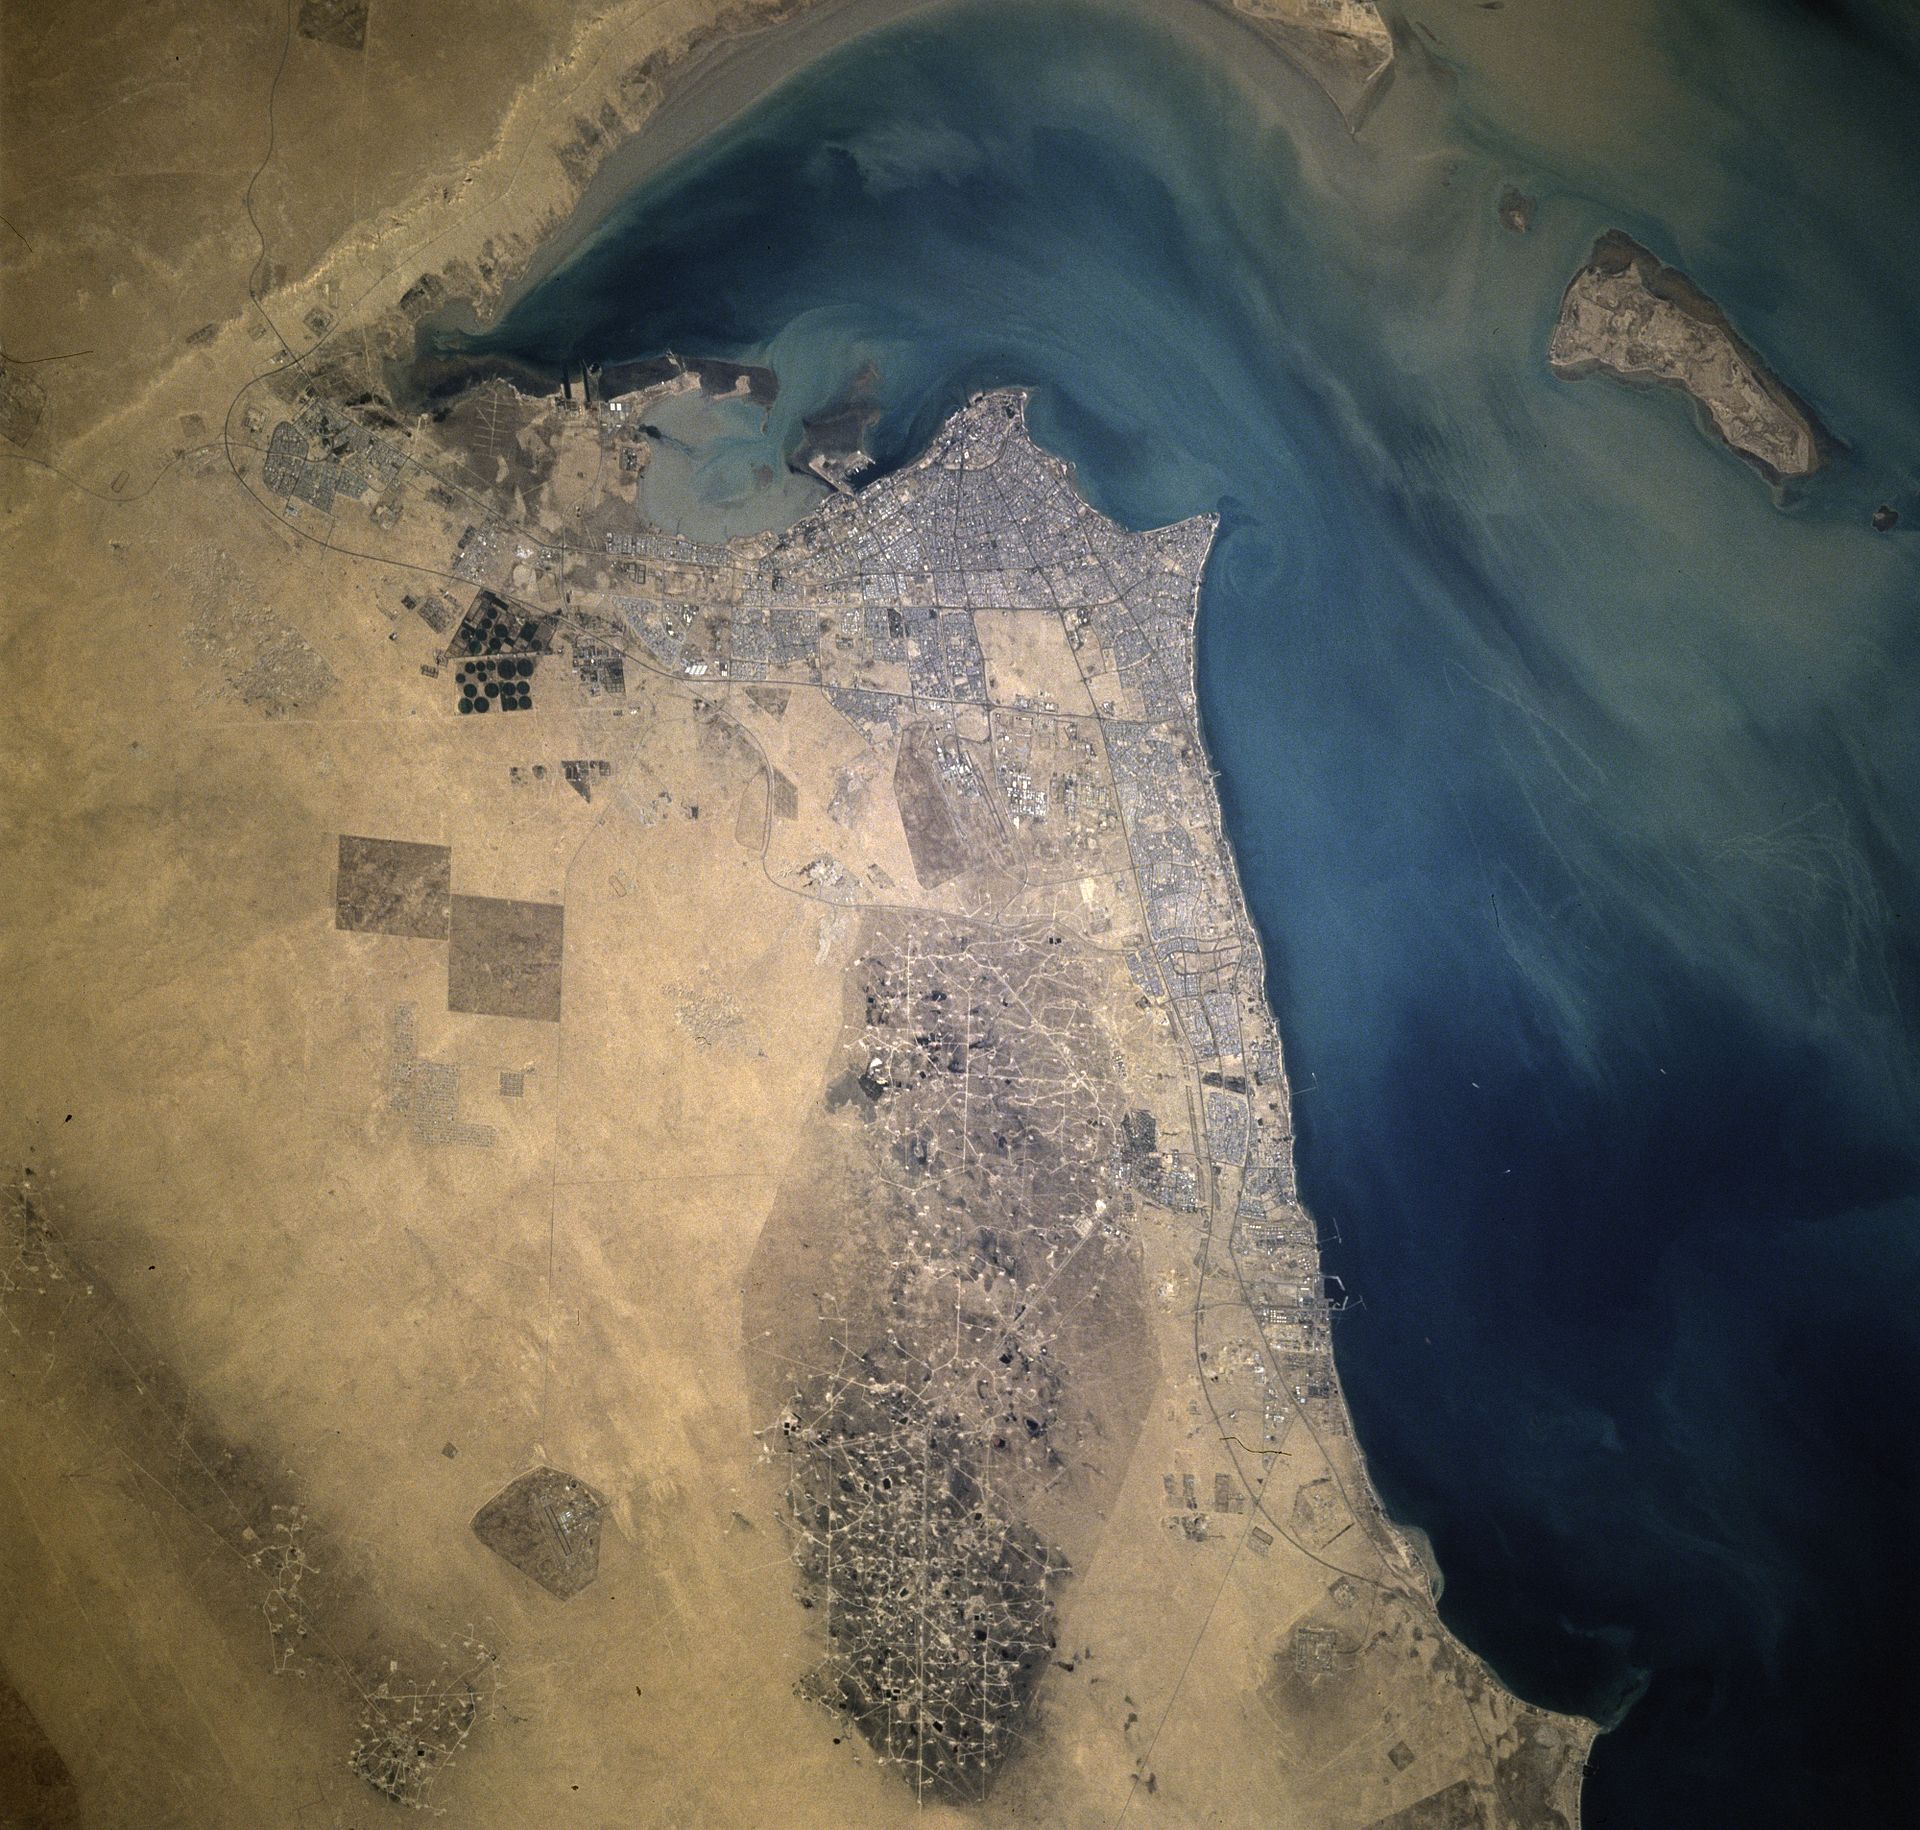 Kuwait, One Of The World’s Wealthiest Oil Exporters, Is Becoming Unlivable